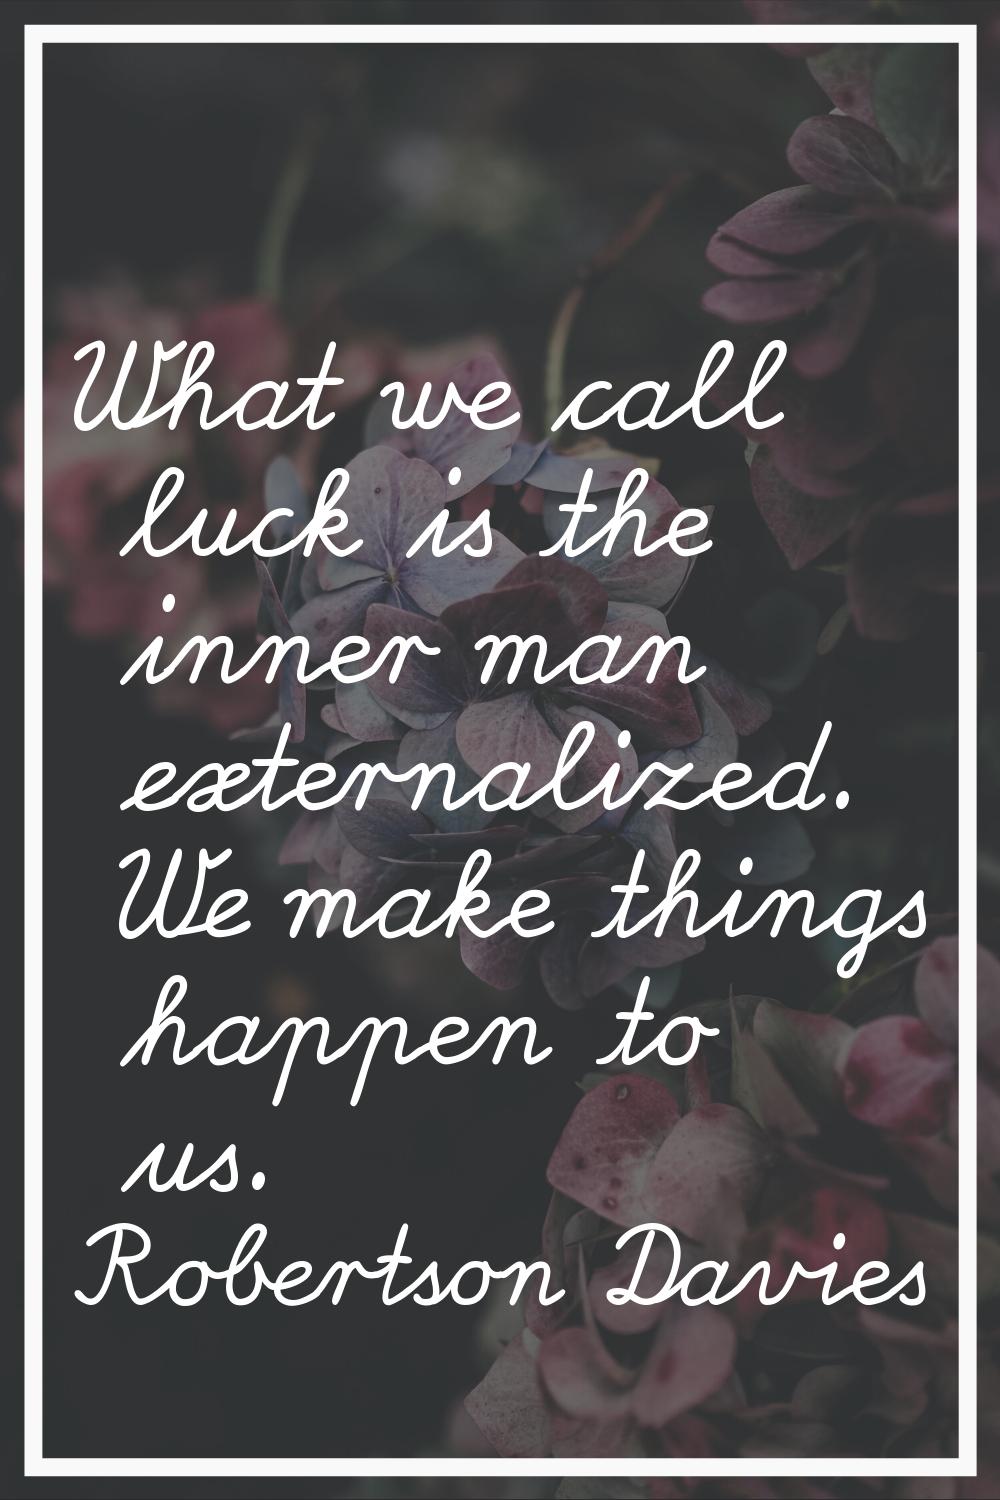 What we call luck is the inner man externalized. We make things happen to us.